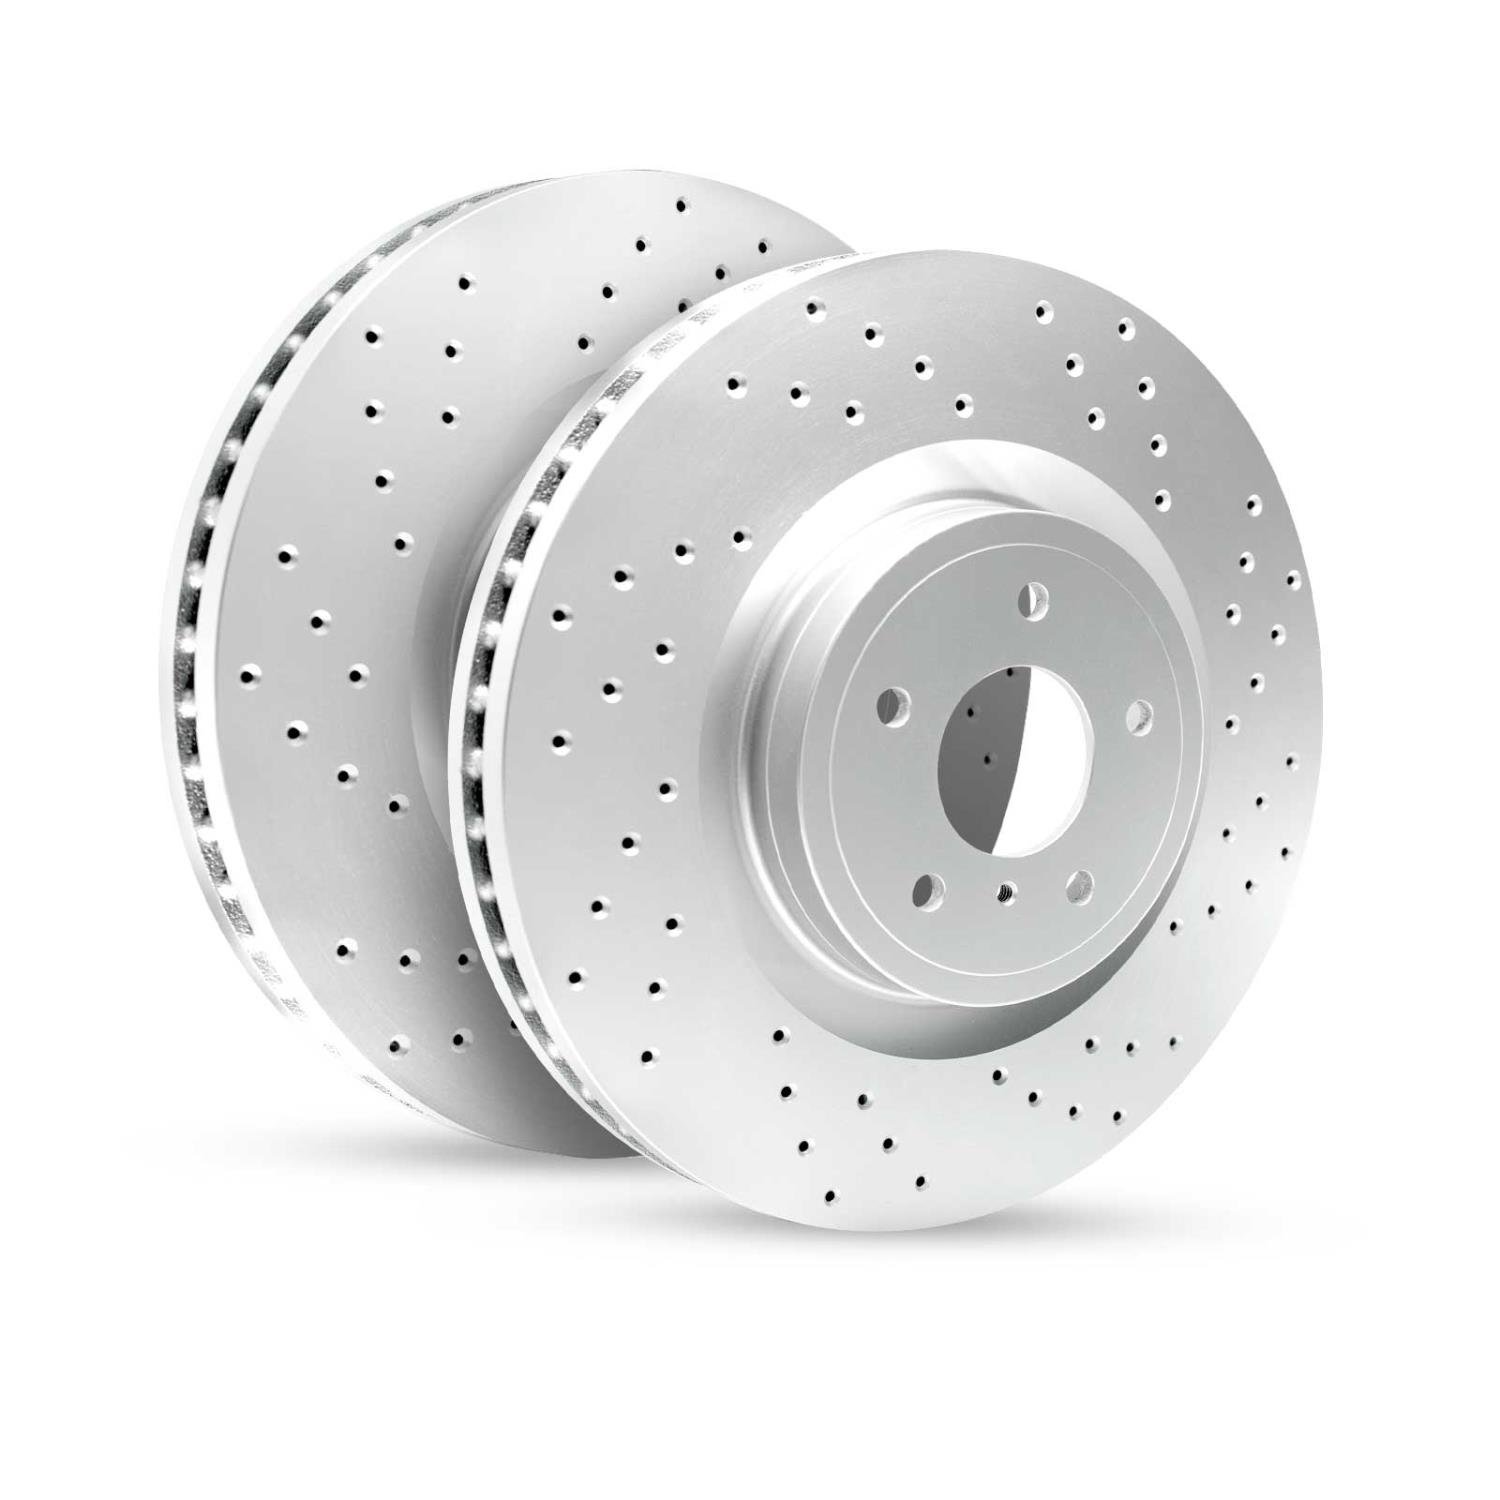 GEO-Carbon Drilled/Slotted Rotors, 2018-2020 Land Rover,